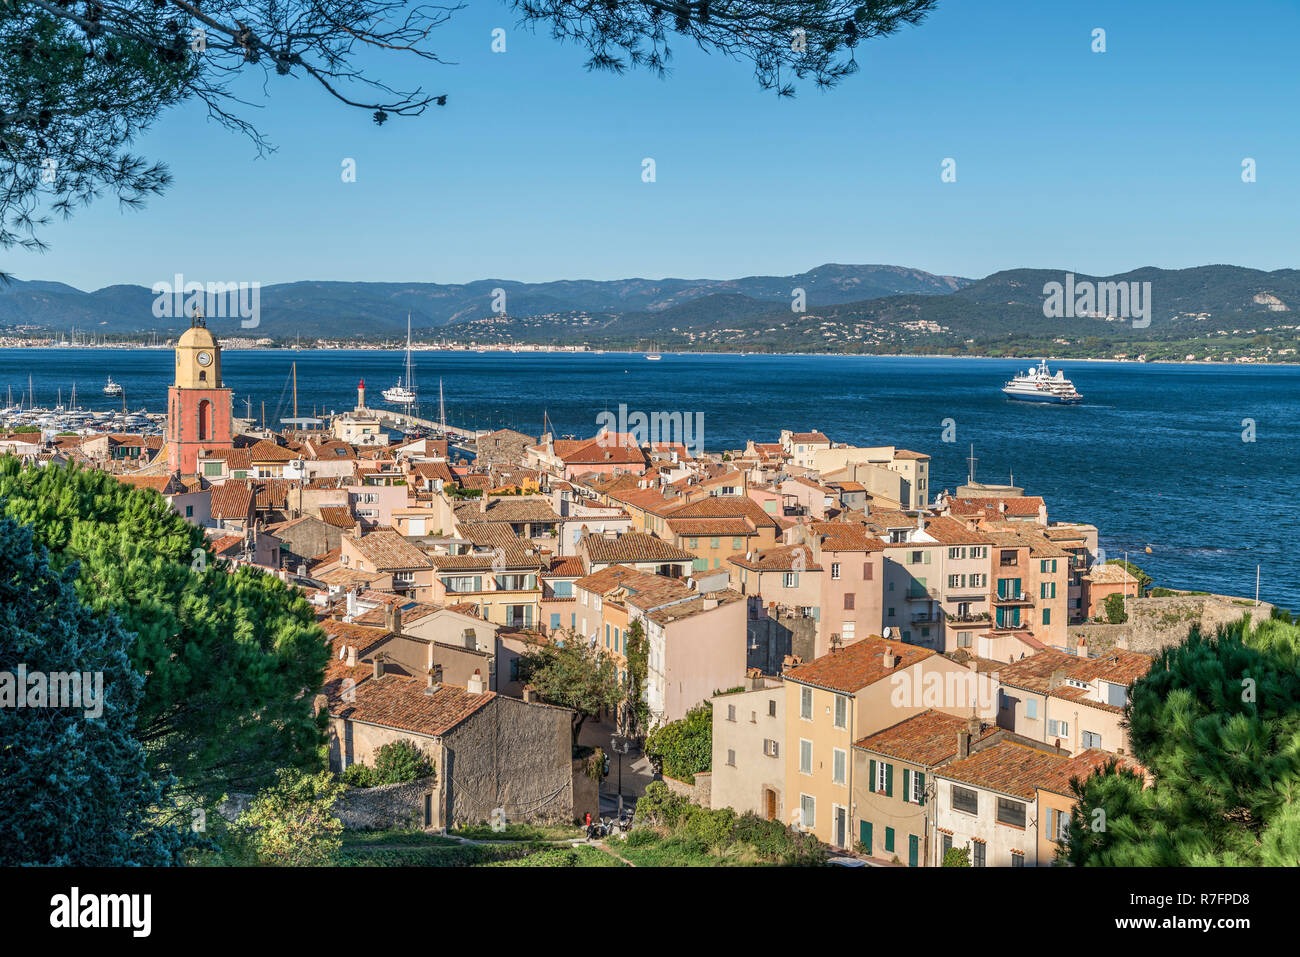 aerial view of town of saint tropez and bay, Clock tower, Cote d' Azur ...